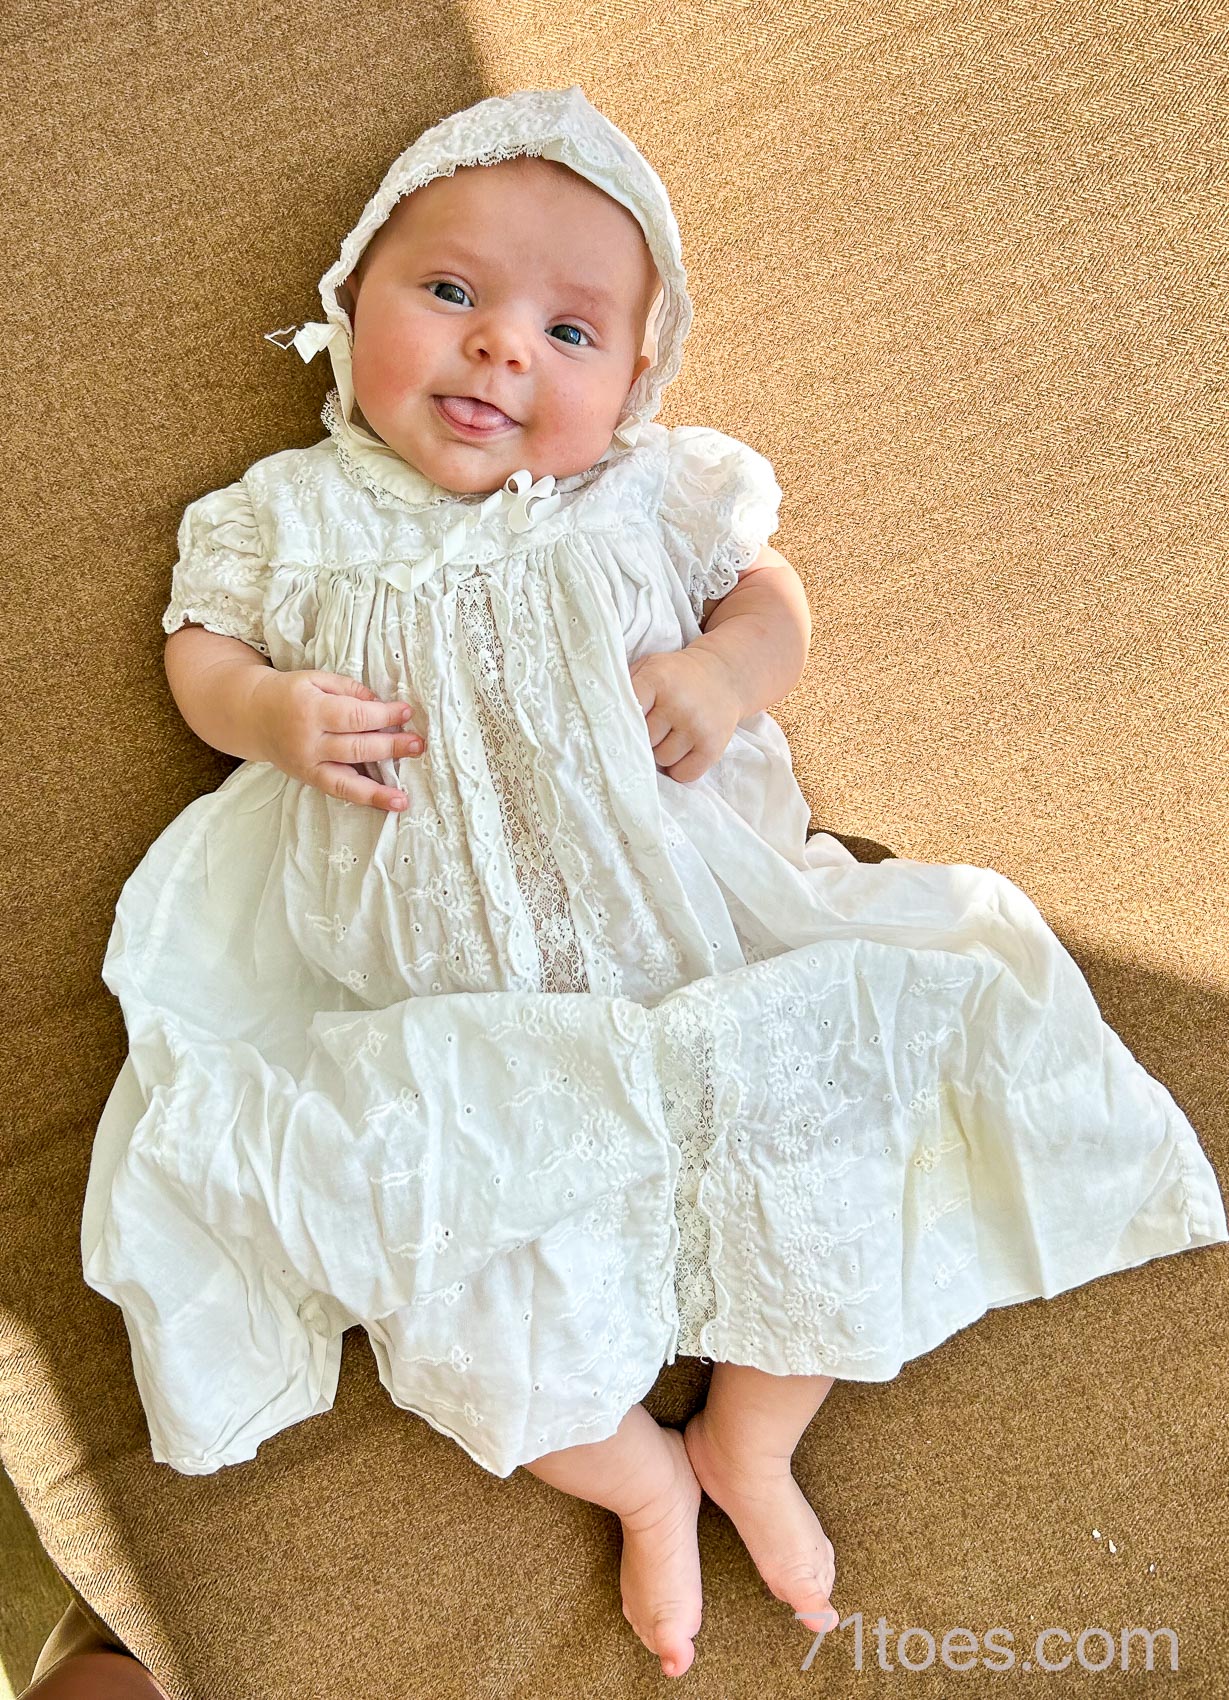 Murphy in her blessing dress